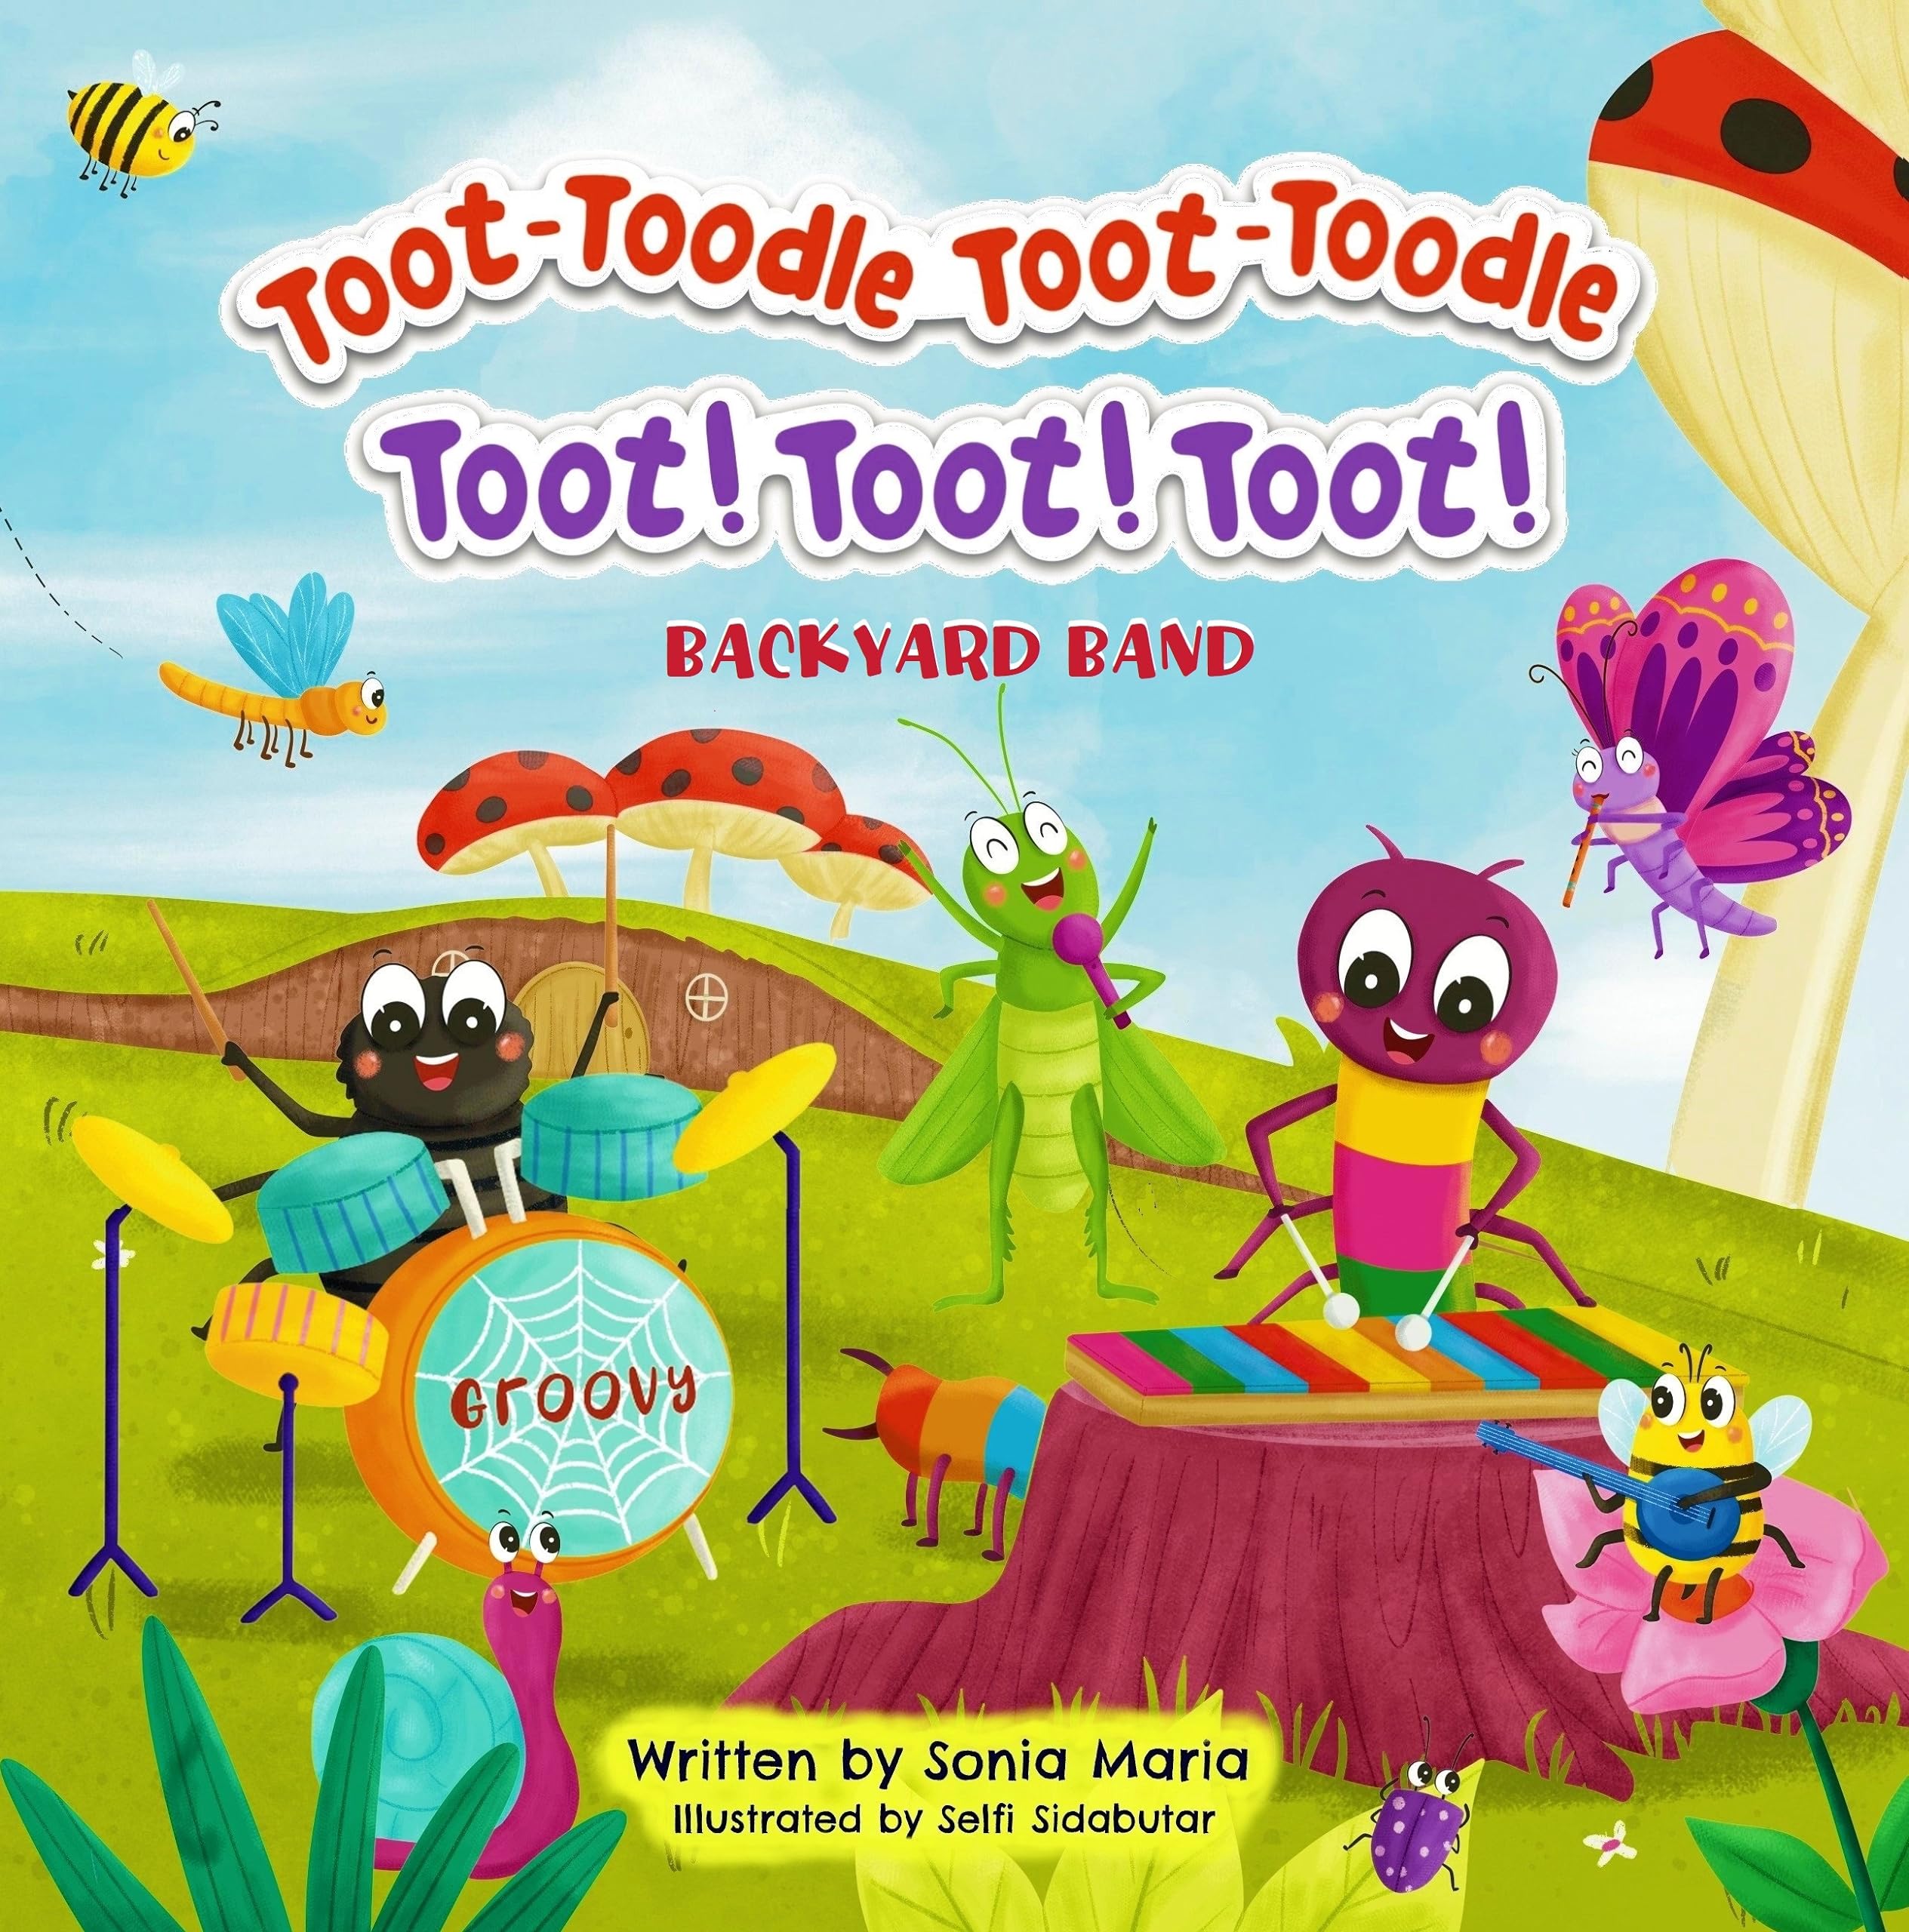 Toot-Toodle Toot-Toodle Toot! Toot! Toot!: Backyard Band (JOIN IN!)